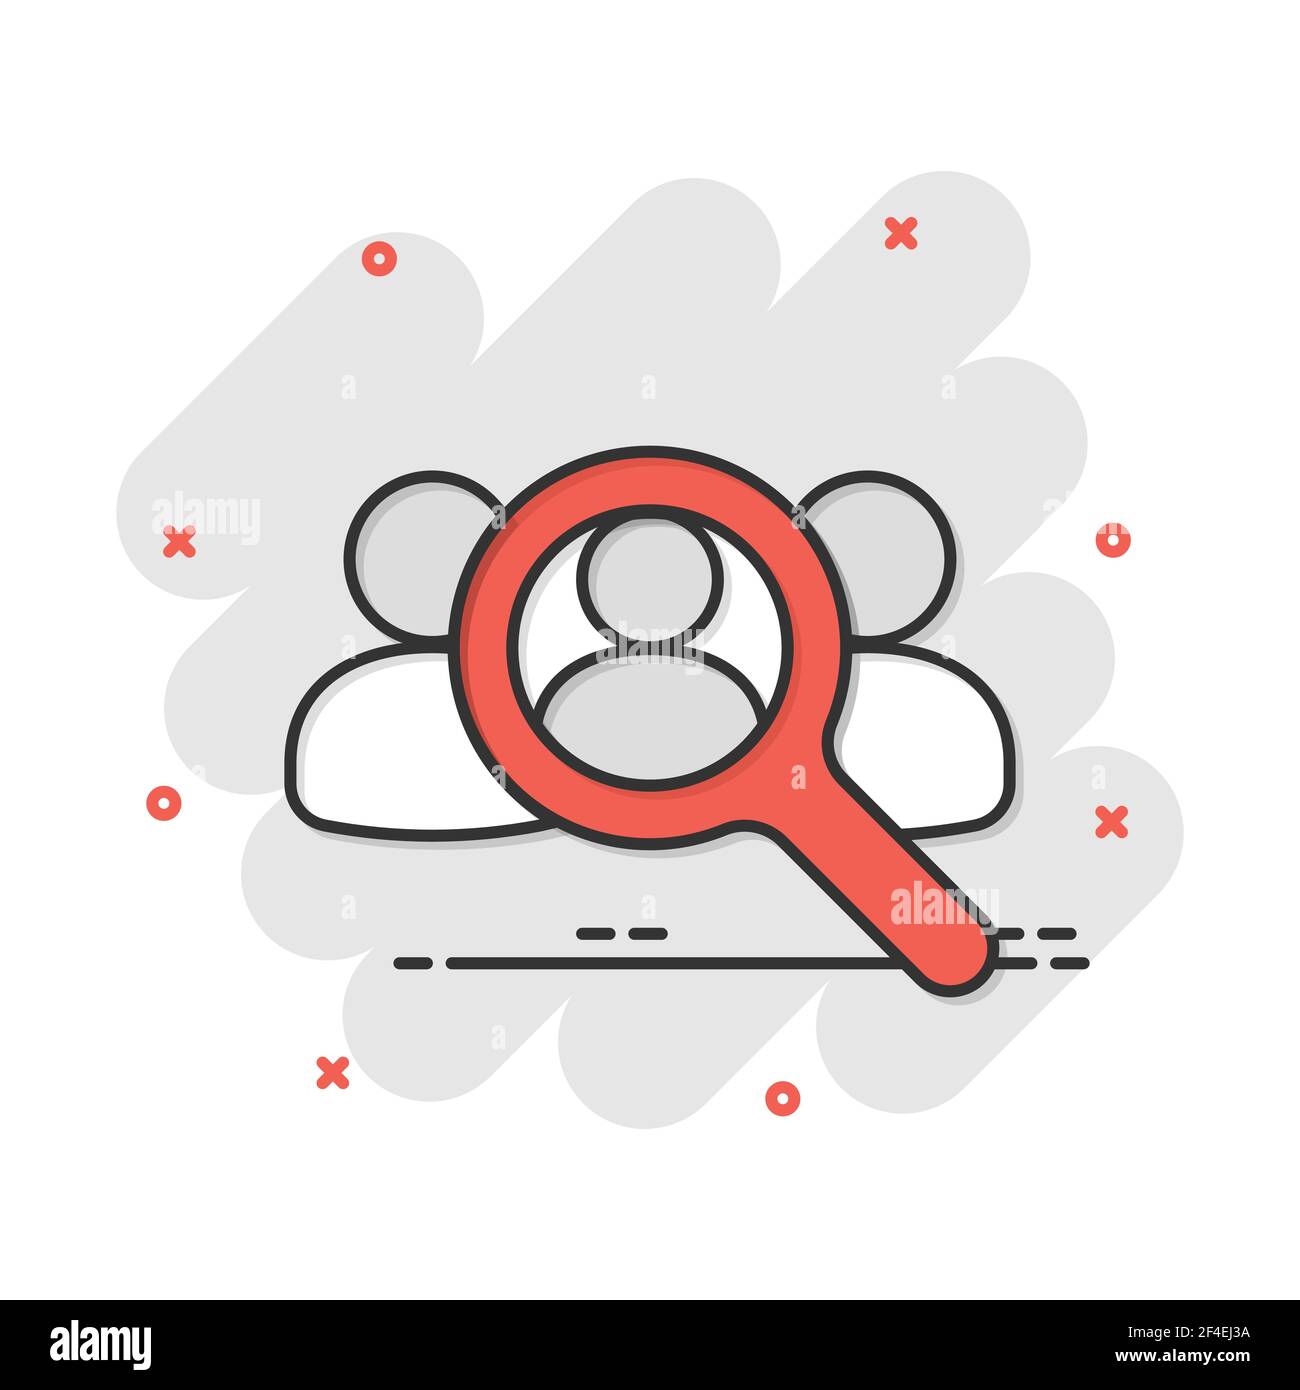 Vector cartoon search for employees and job icon in comic style. Human resource concept illustration pictogram. Focus group, public relations business Stock Vector